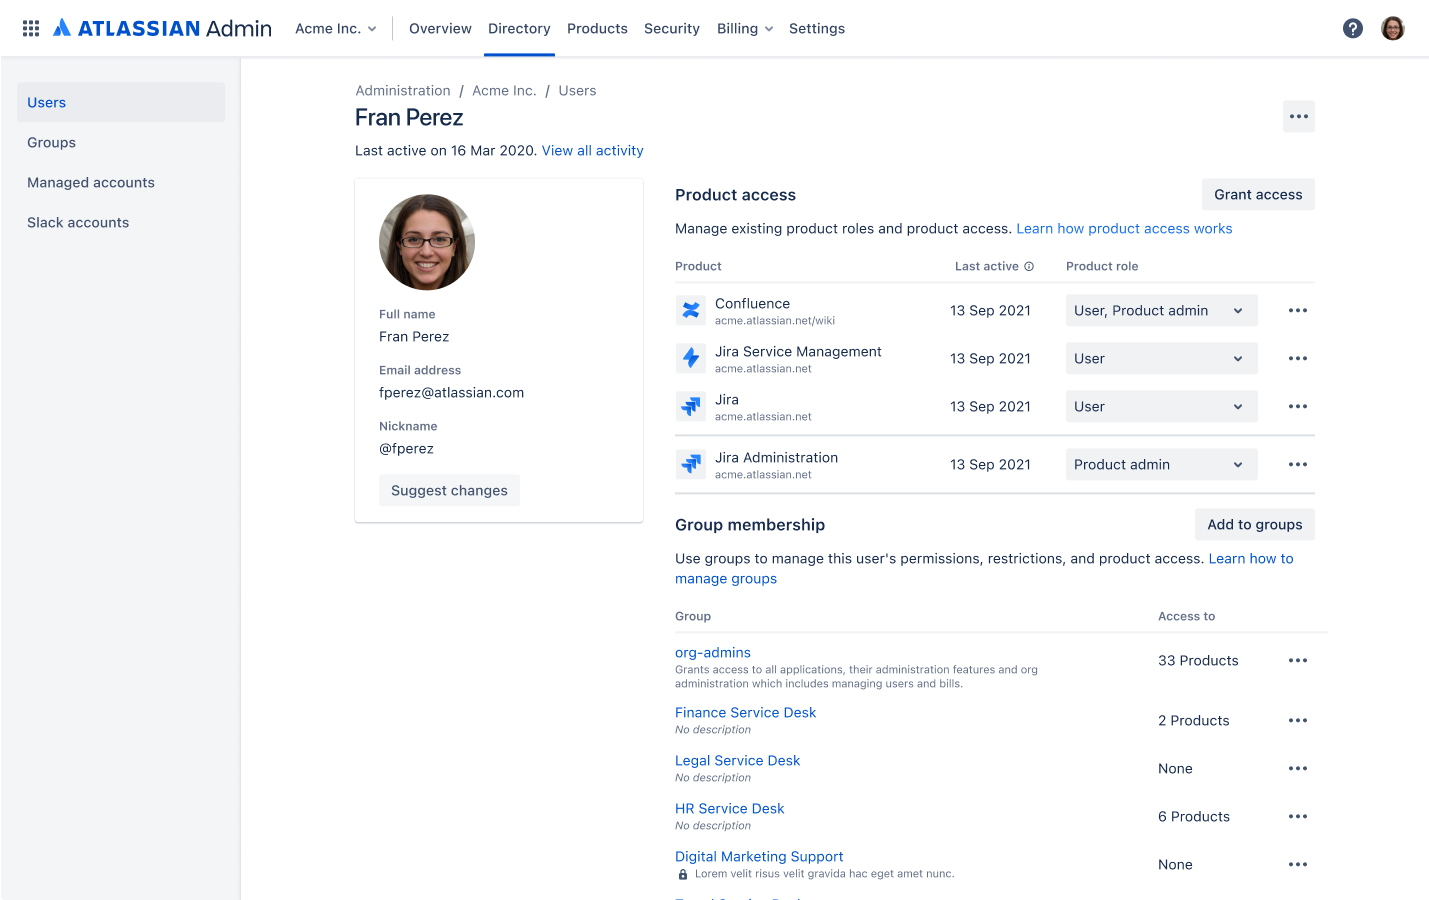 User profile page, with the product admin role for Jira Administration